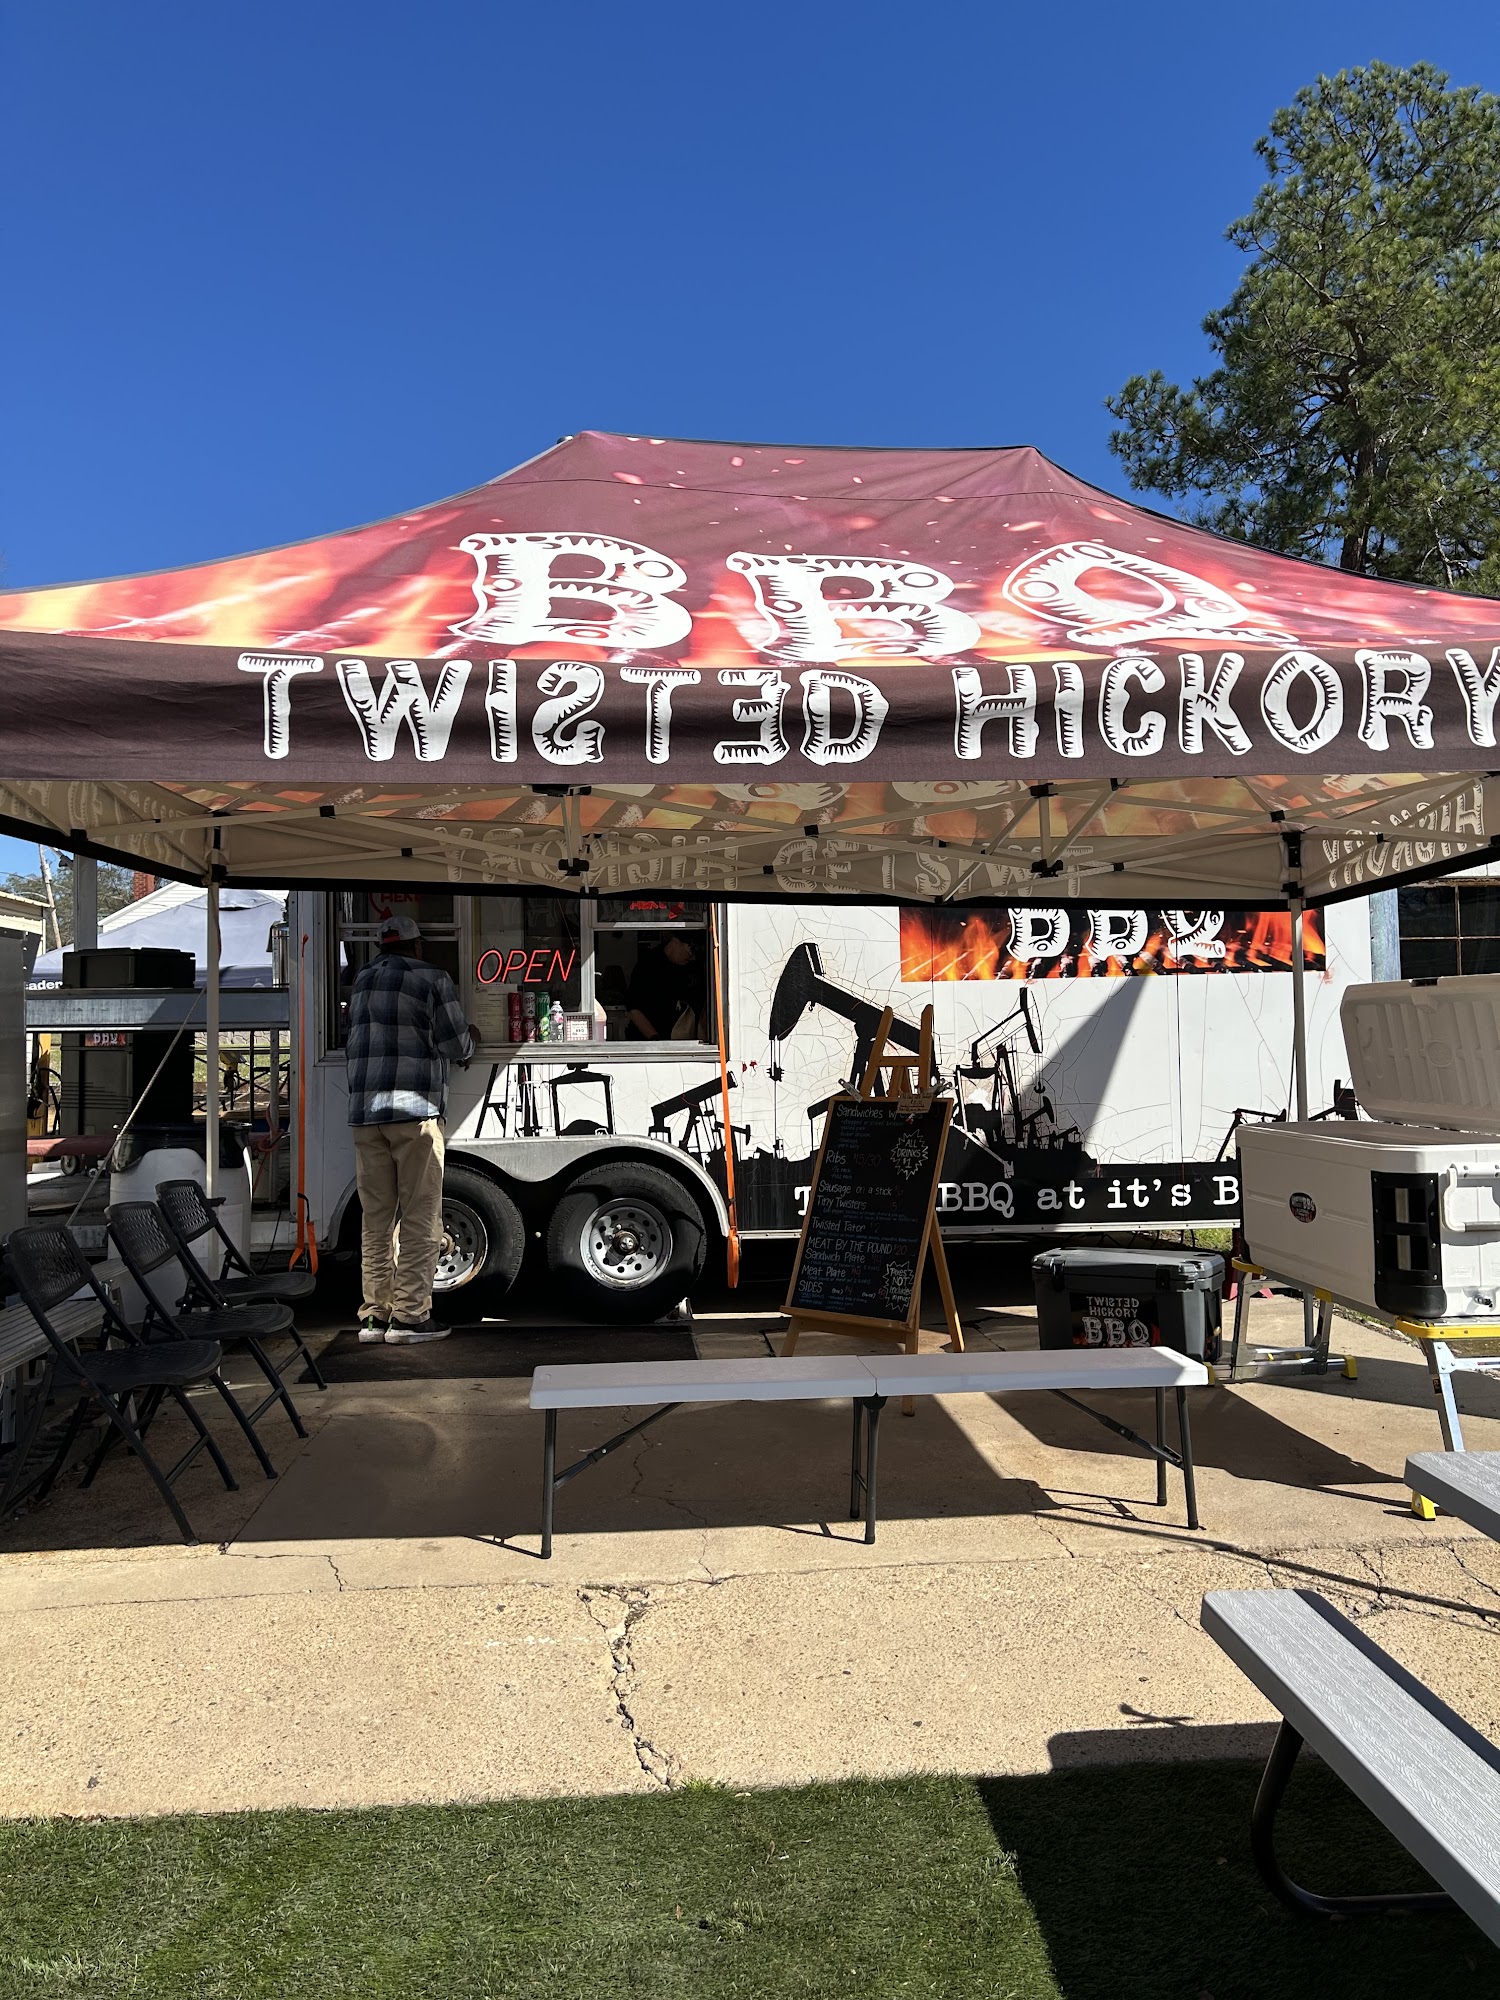 Twisted Hickory BBQ